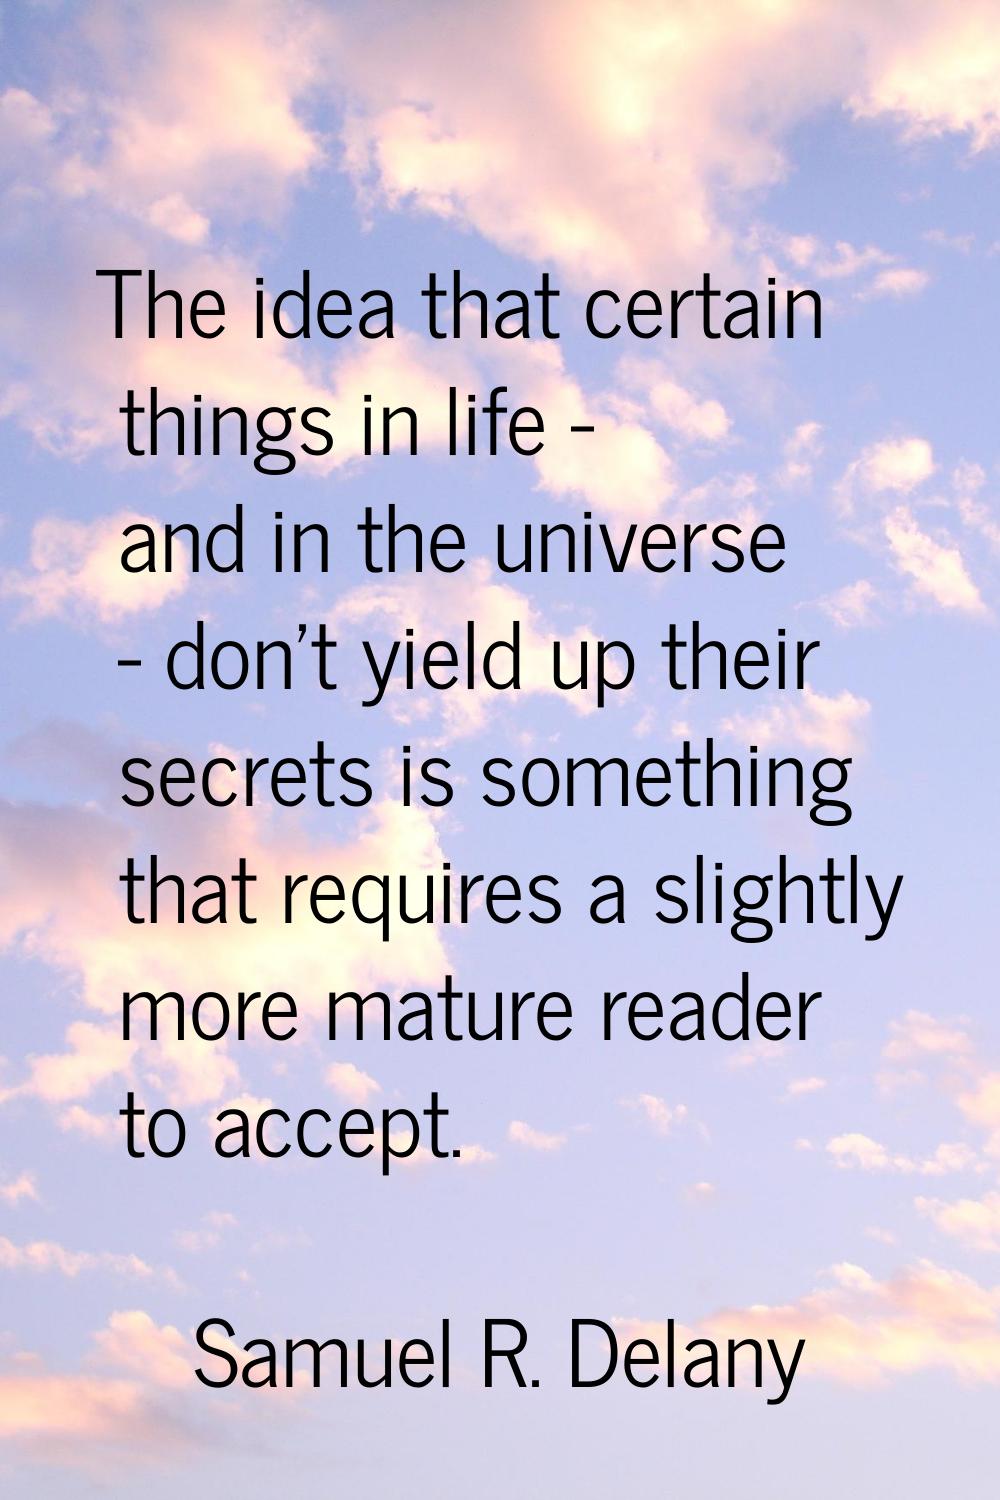 The idea that certain things in life - and in the universe - don't yield up their secrets is someth